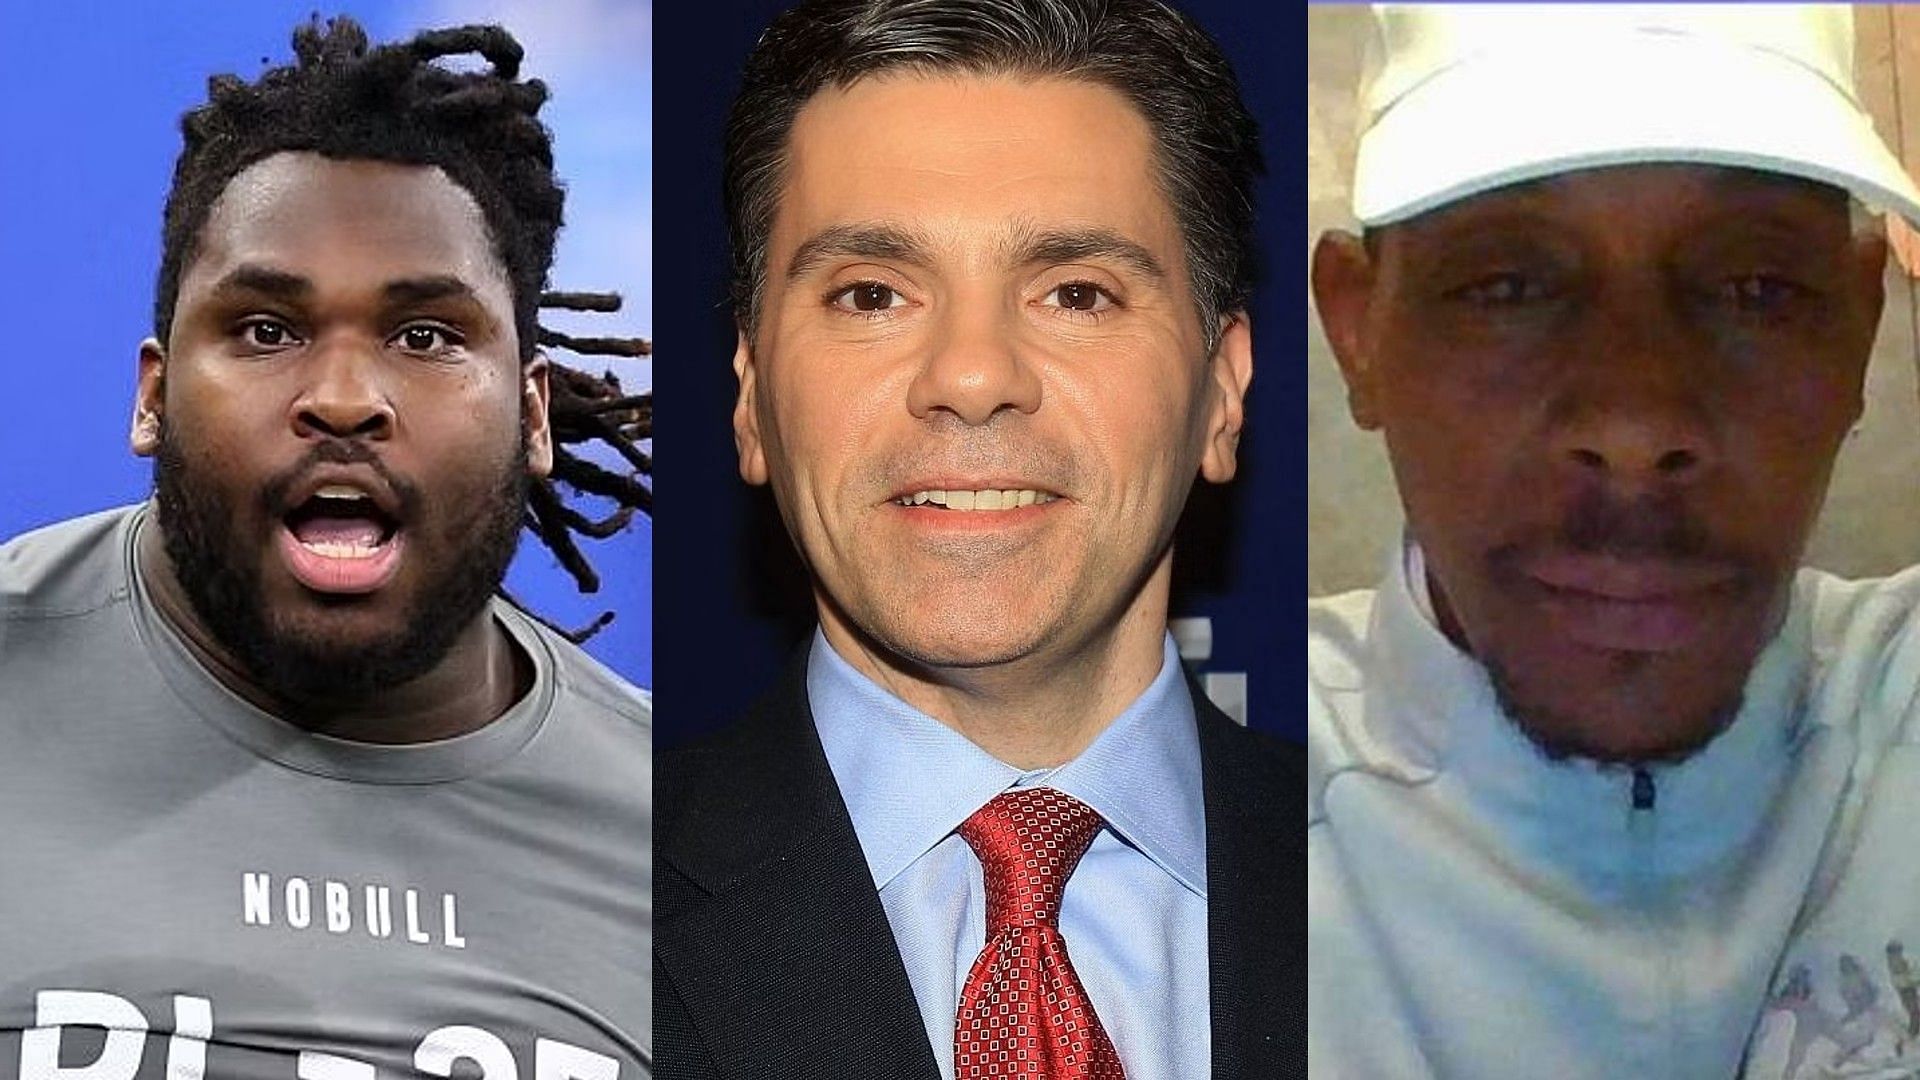 Mike Florio scolds Patrick Mahomes Sr. and T&rsquo;Vondre Sweat for taking hard road that led to DWI